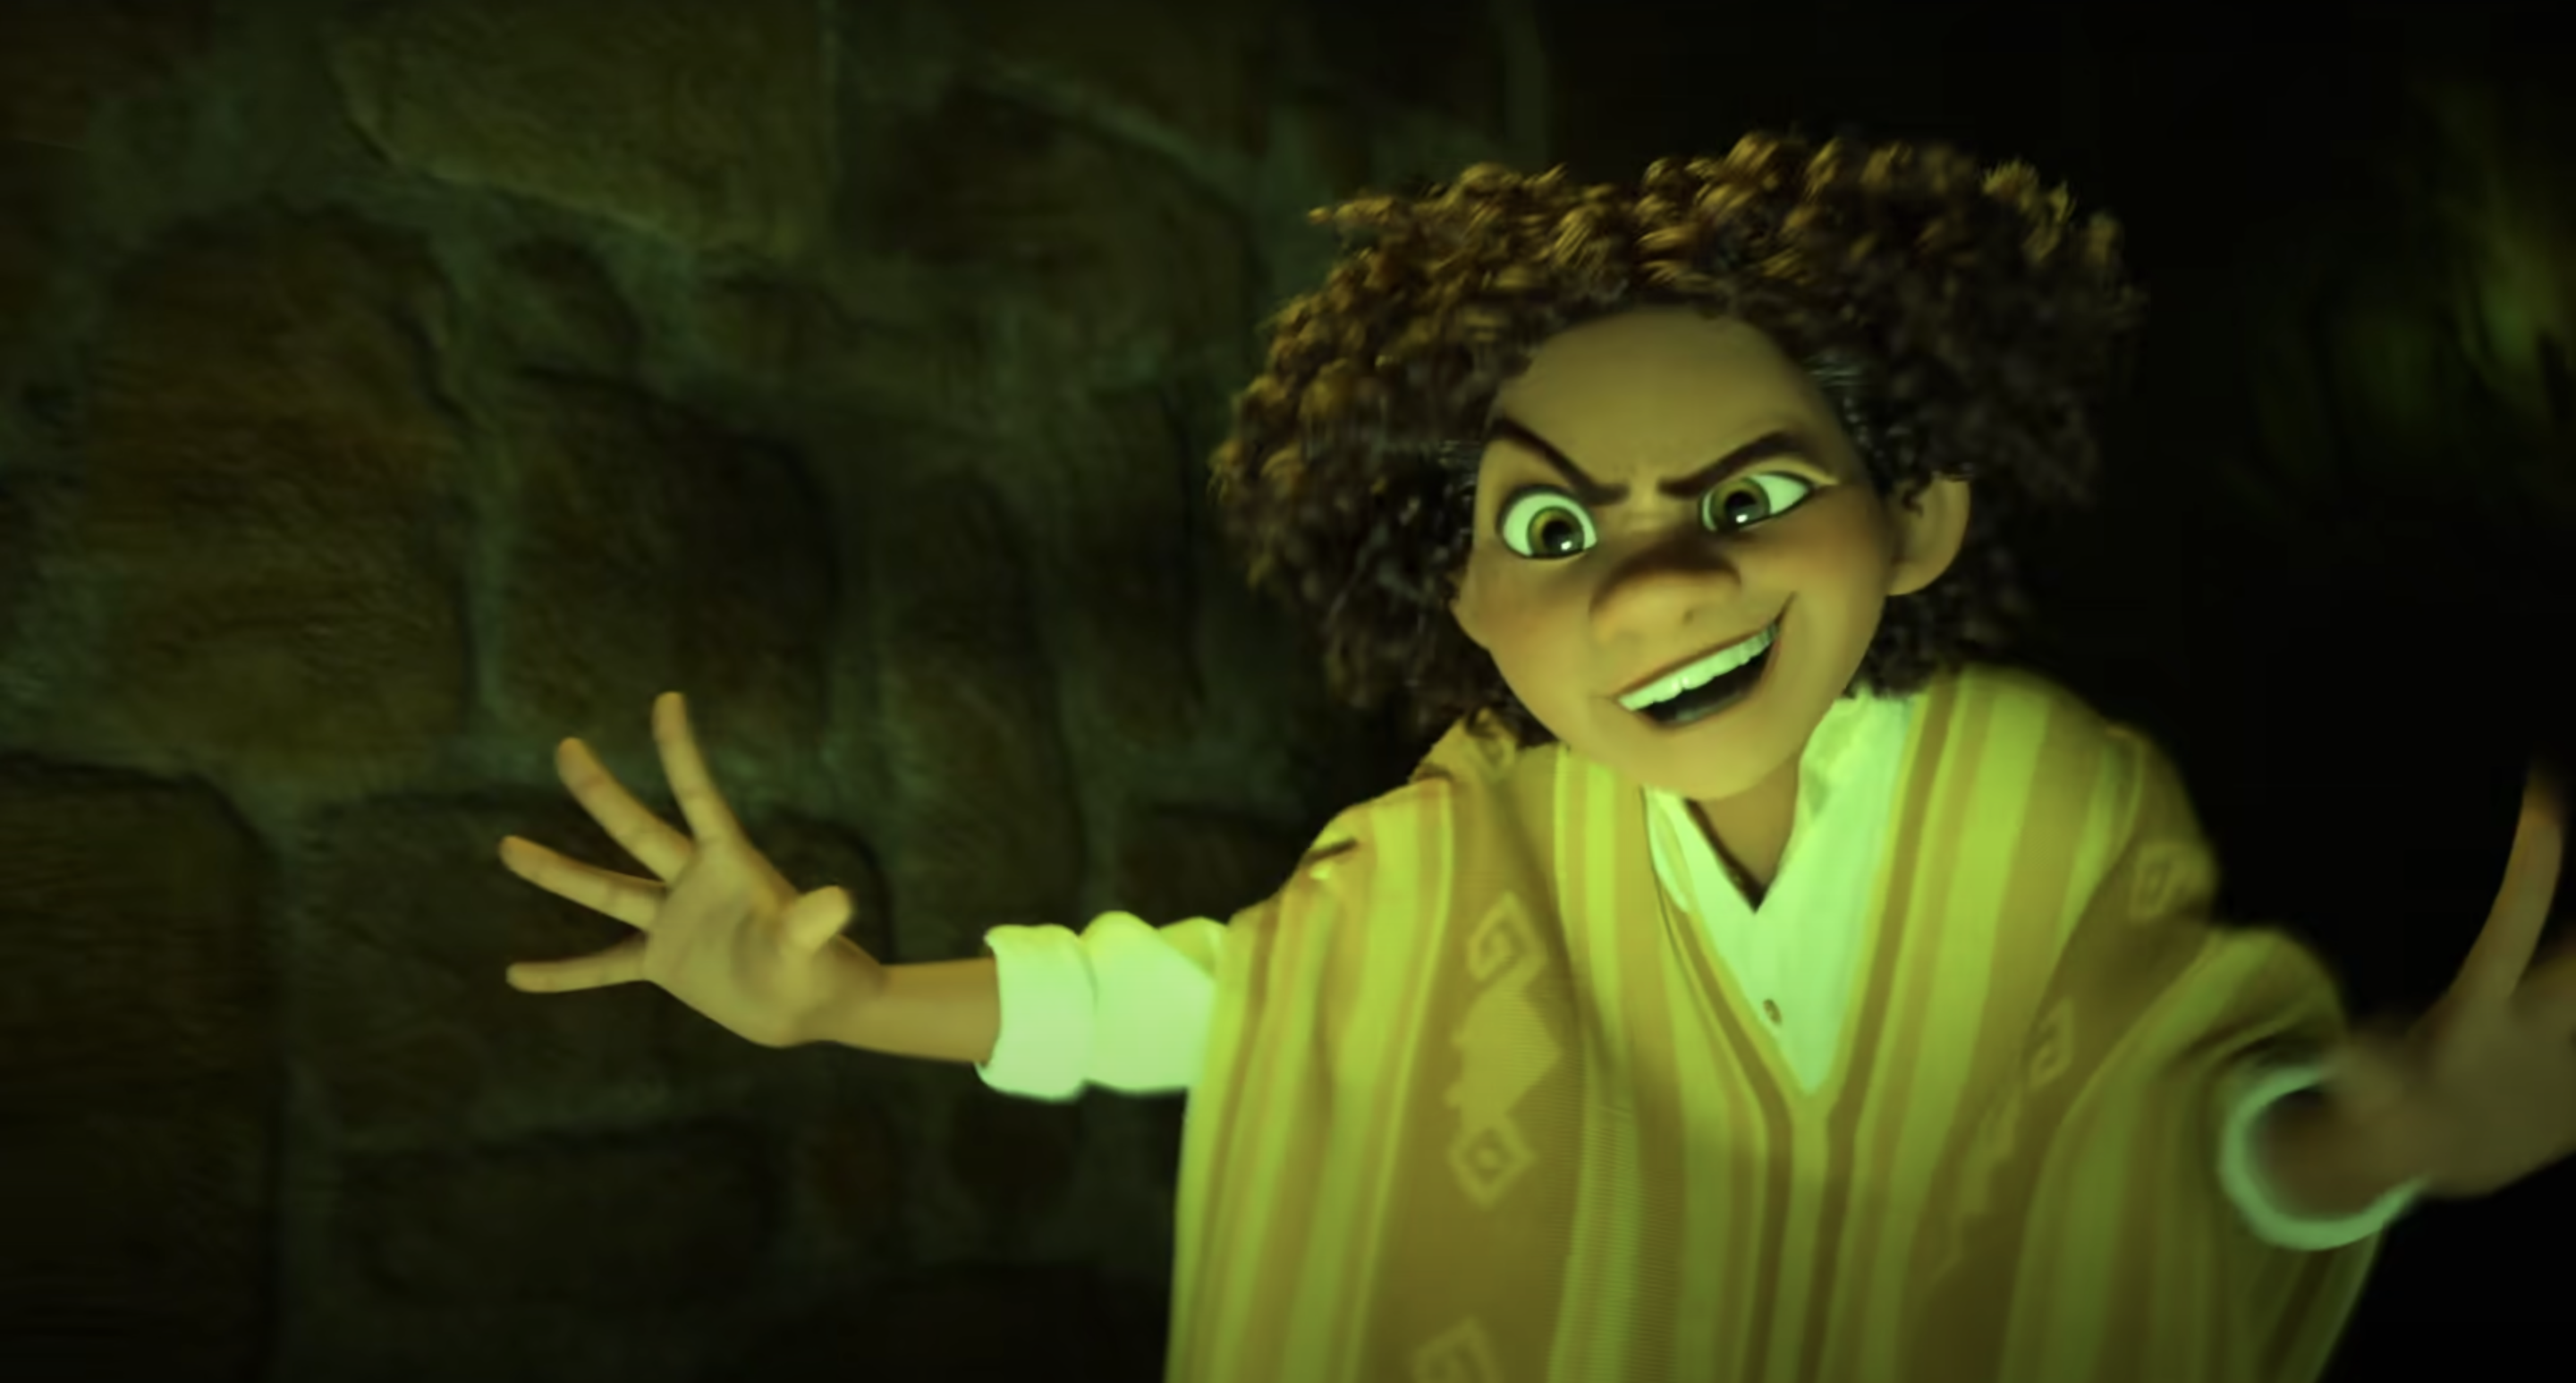 The character Camilo sings in the film “Encanto.”